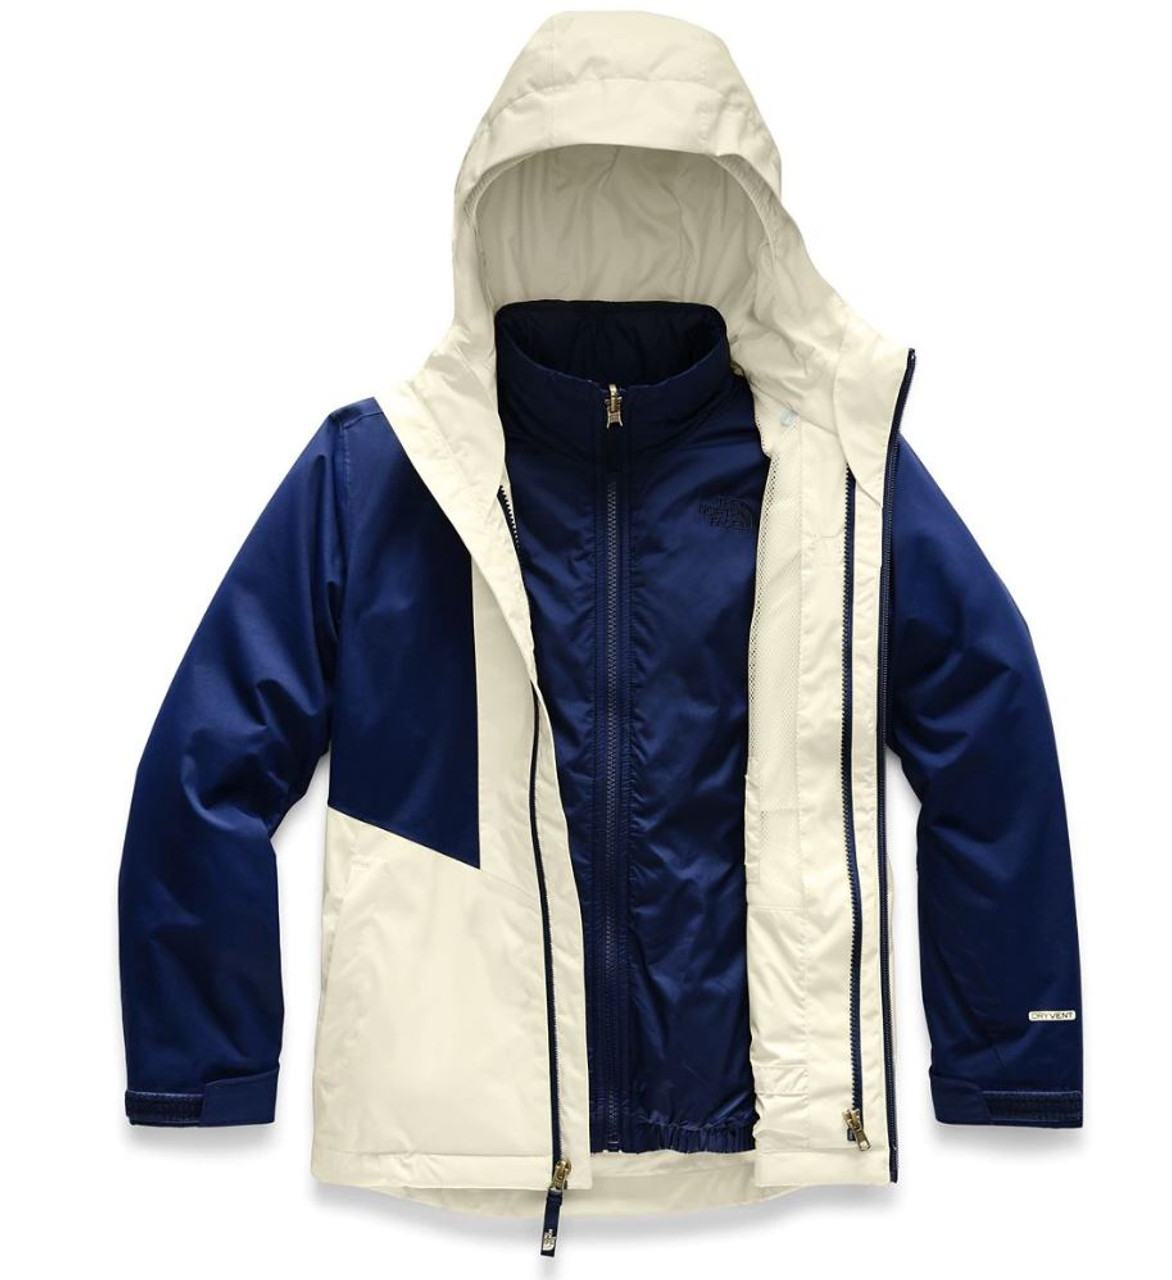 north face zip in compatible